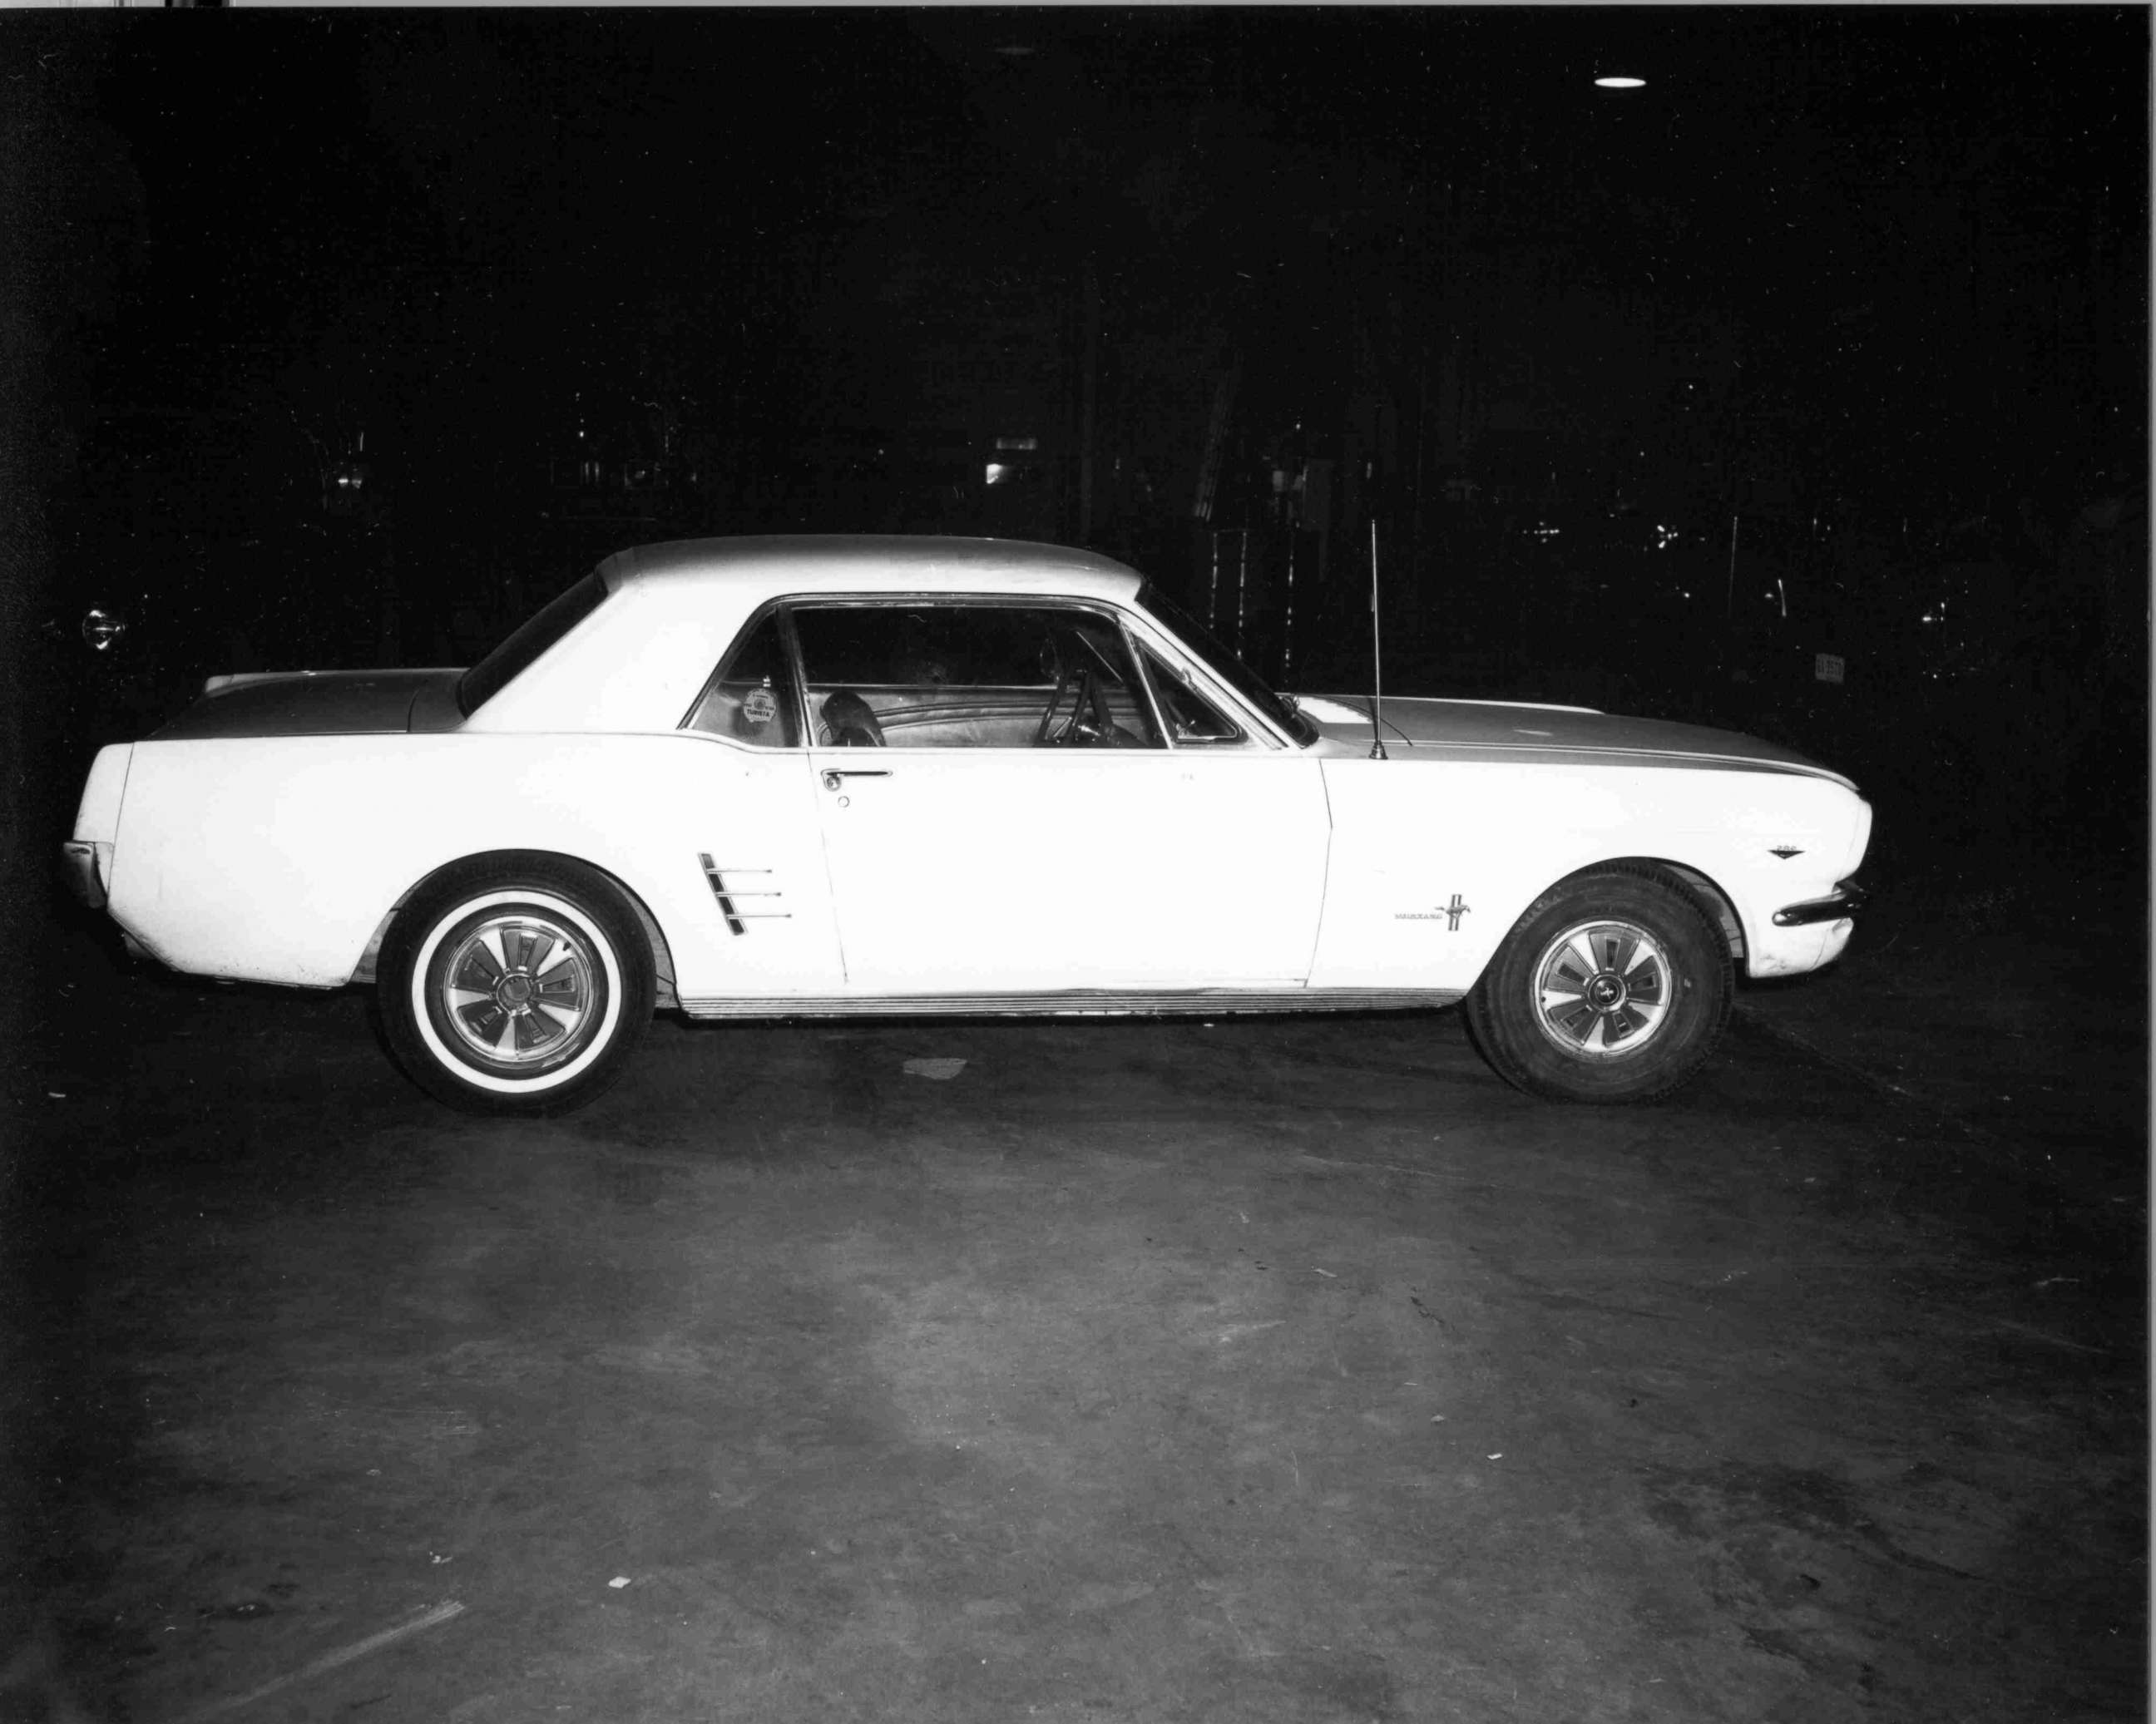 PHOTO: The 1966 White Mustang that James Earl Ray fled in after the assassination in Memphis, Tenn.